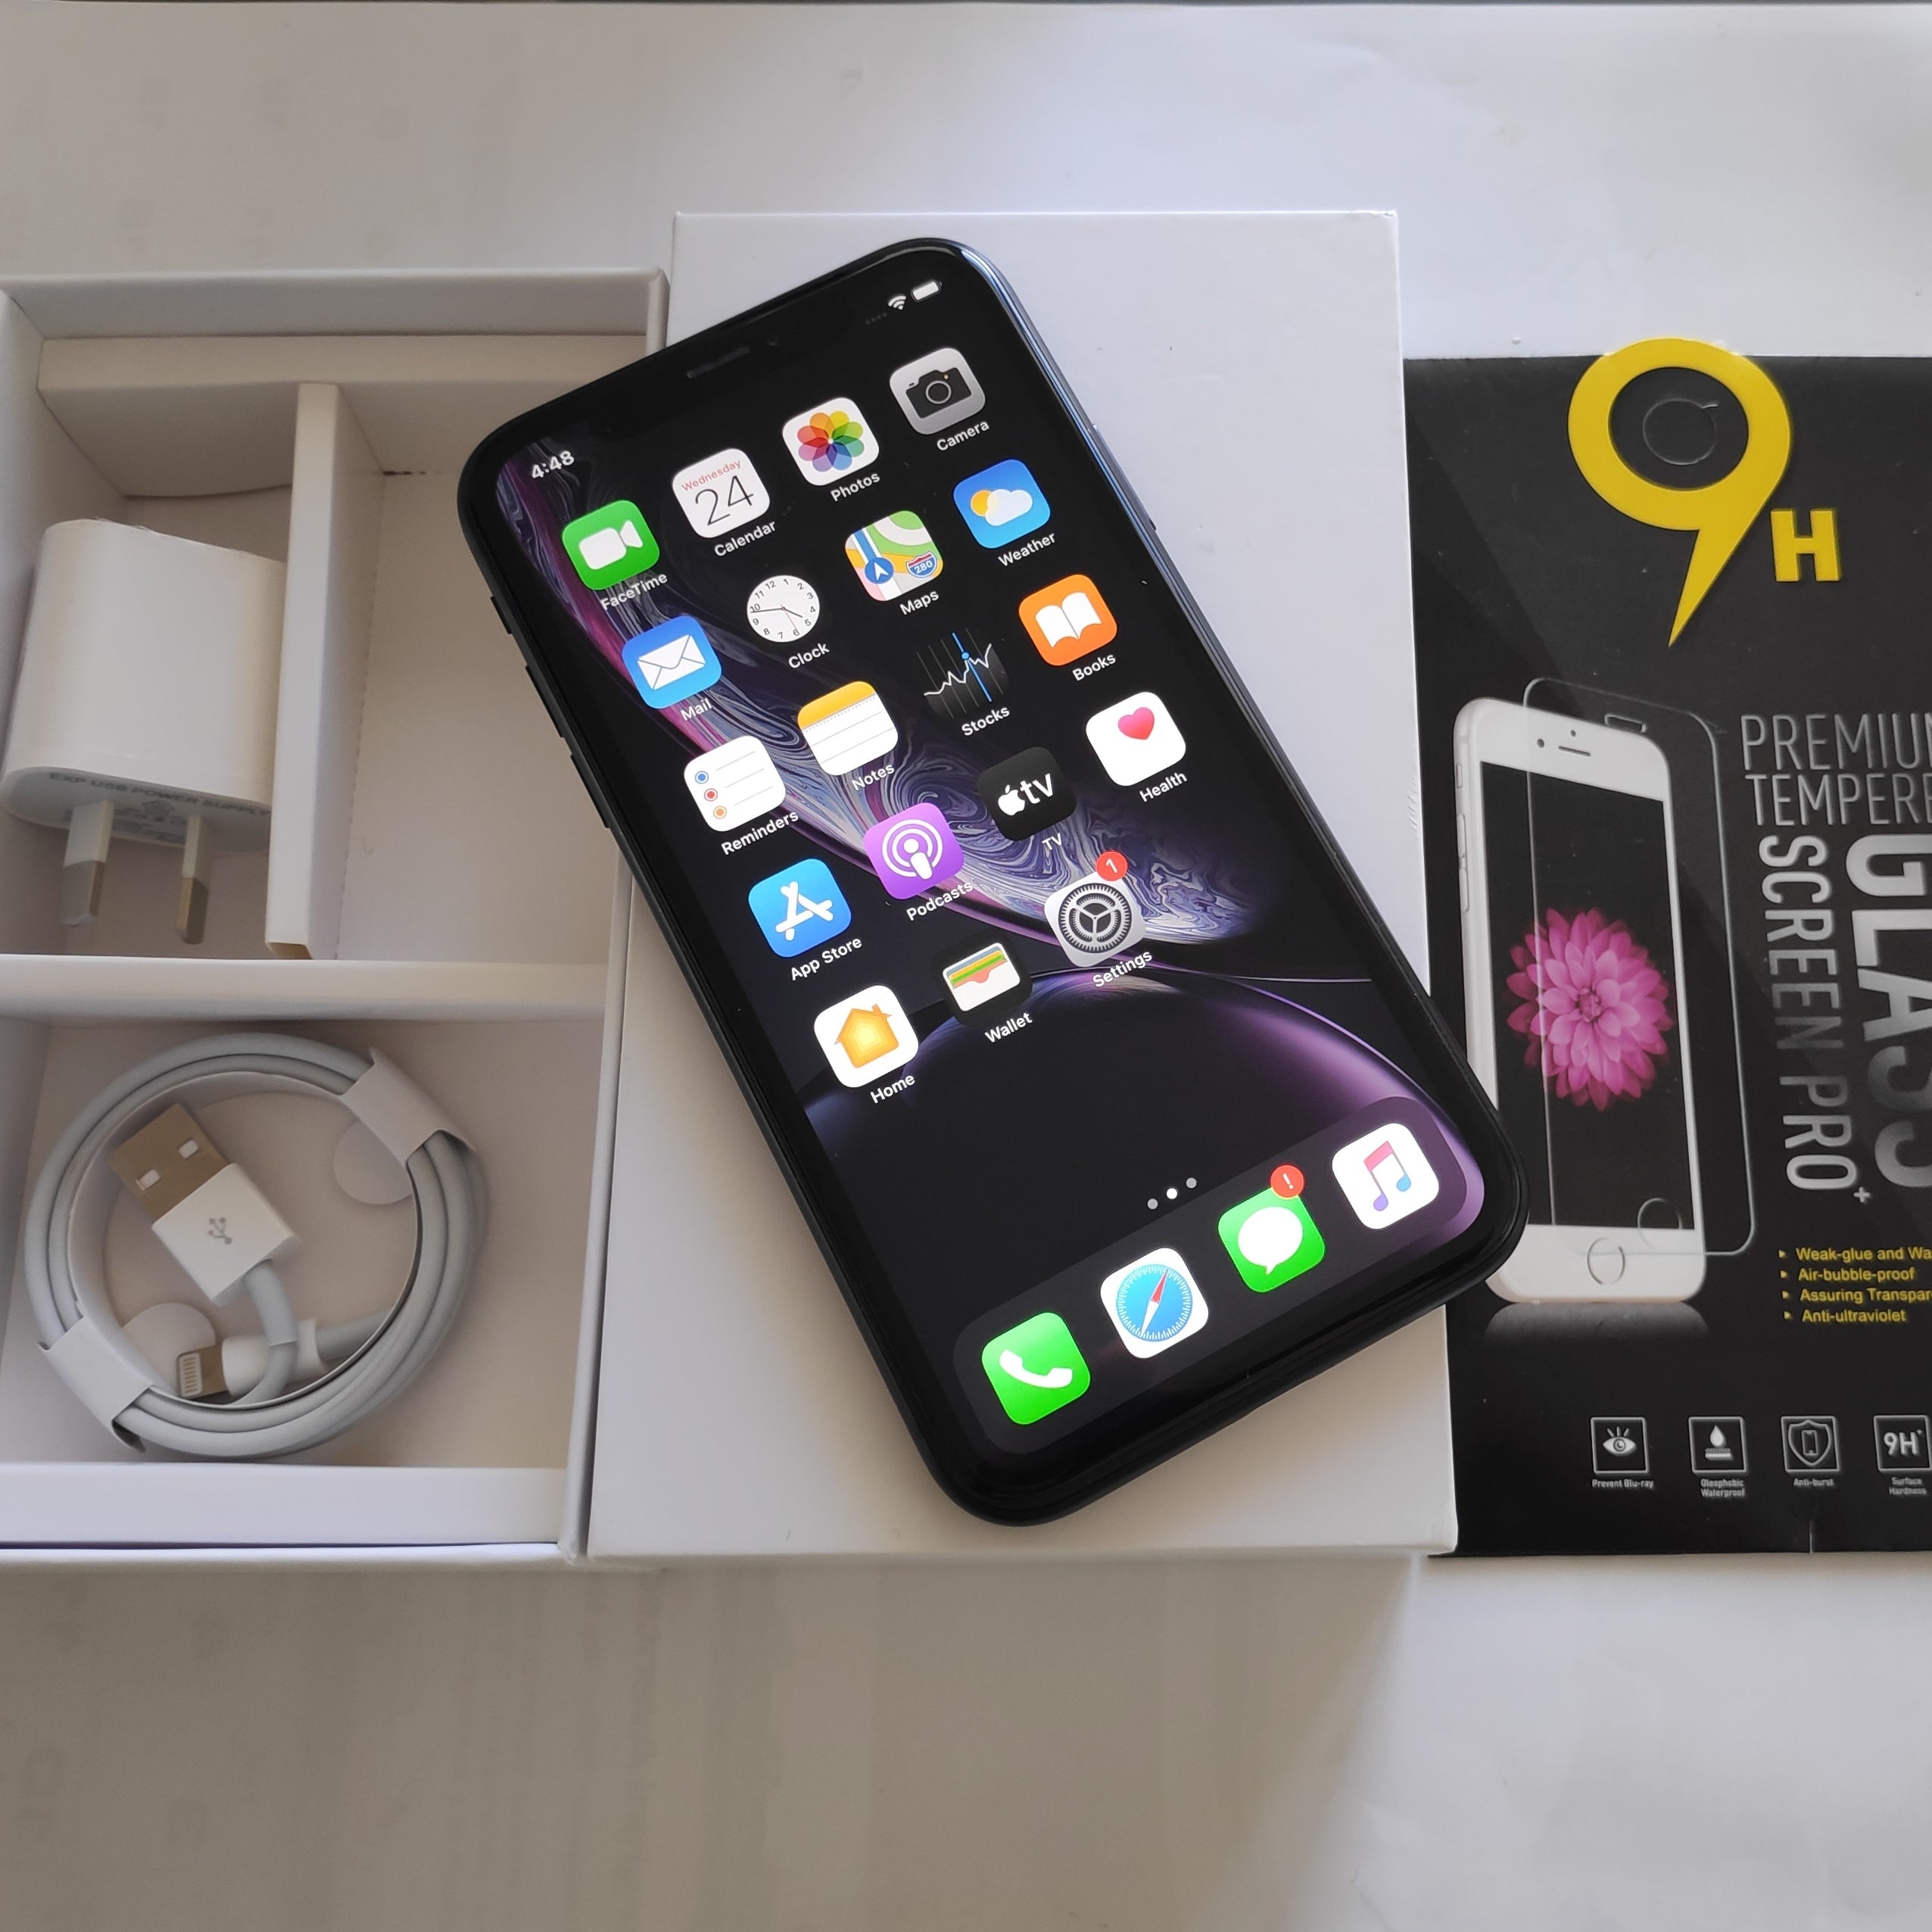 Apple iPhone XR 128GB Black (Like New) New Battery, Case, Glass Screen Protector & Shipping*